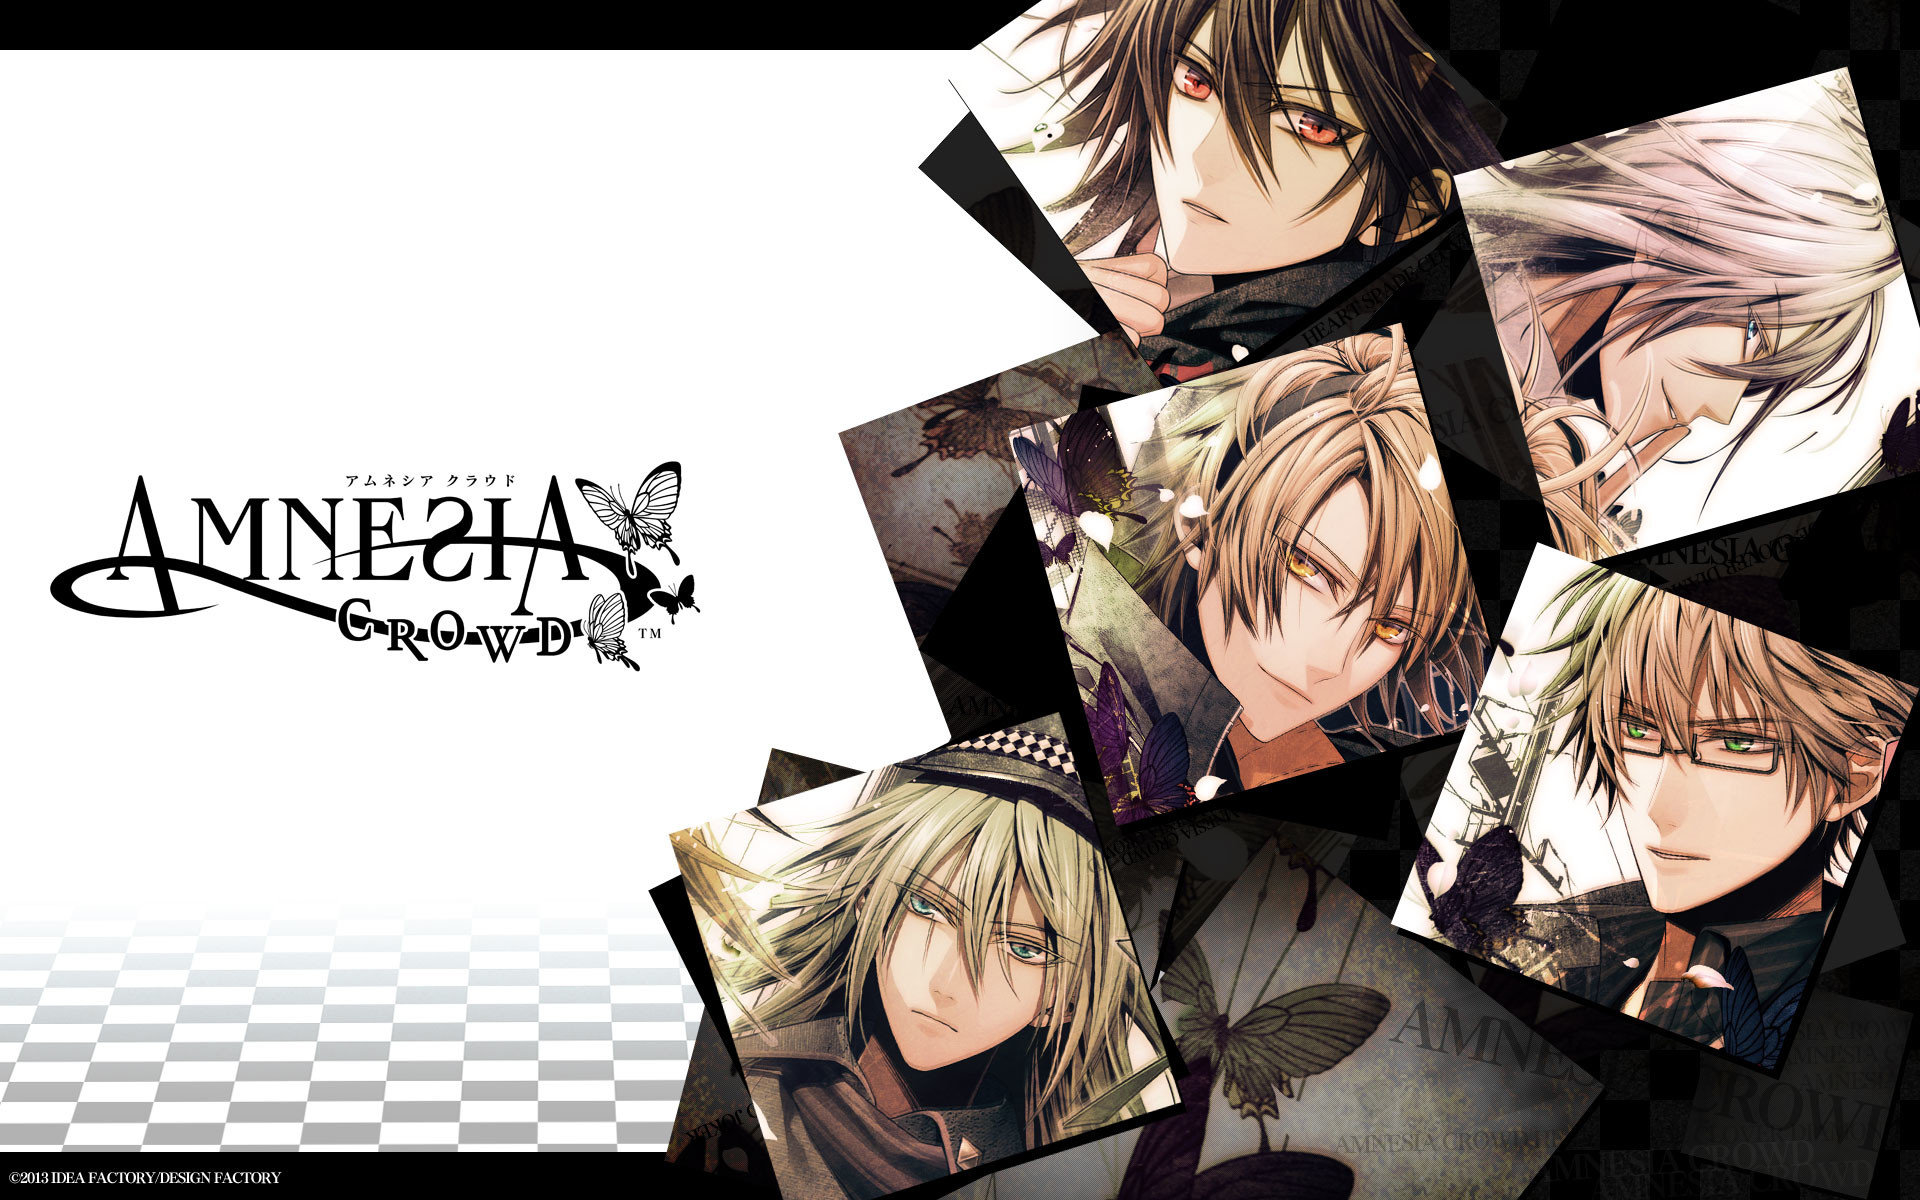 1920x1200 Amnesia Anime Wallpaper | 301 Moved Permanently